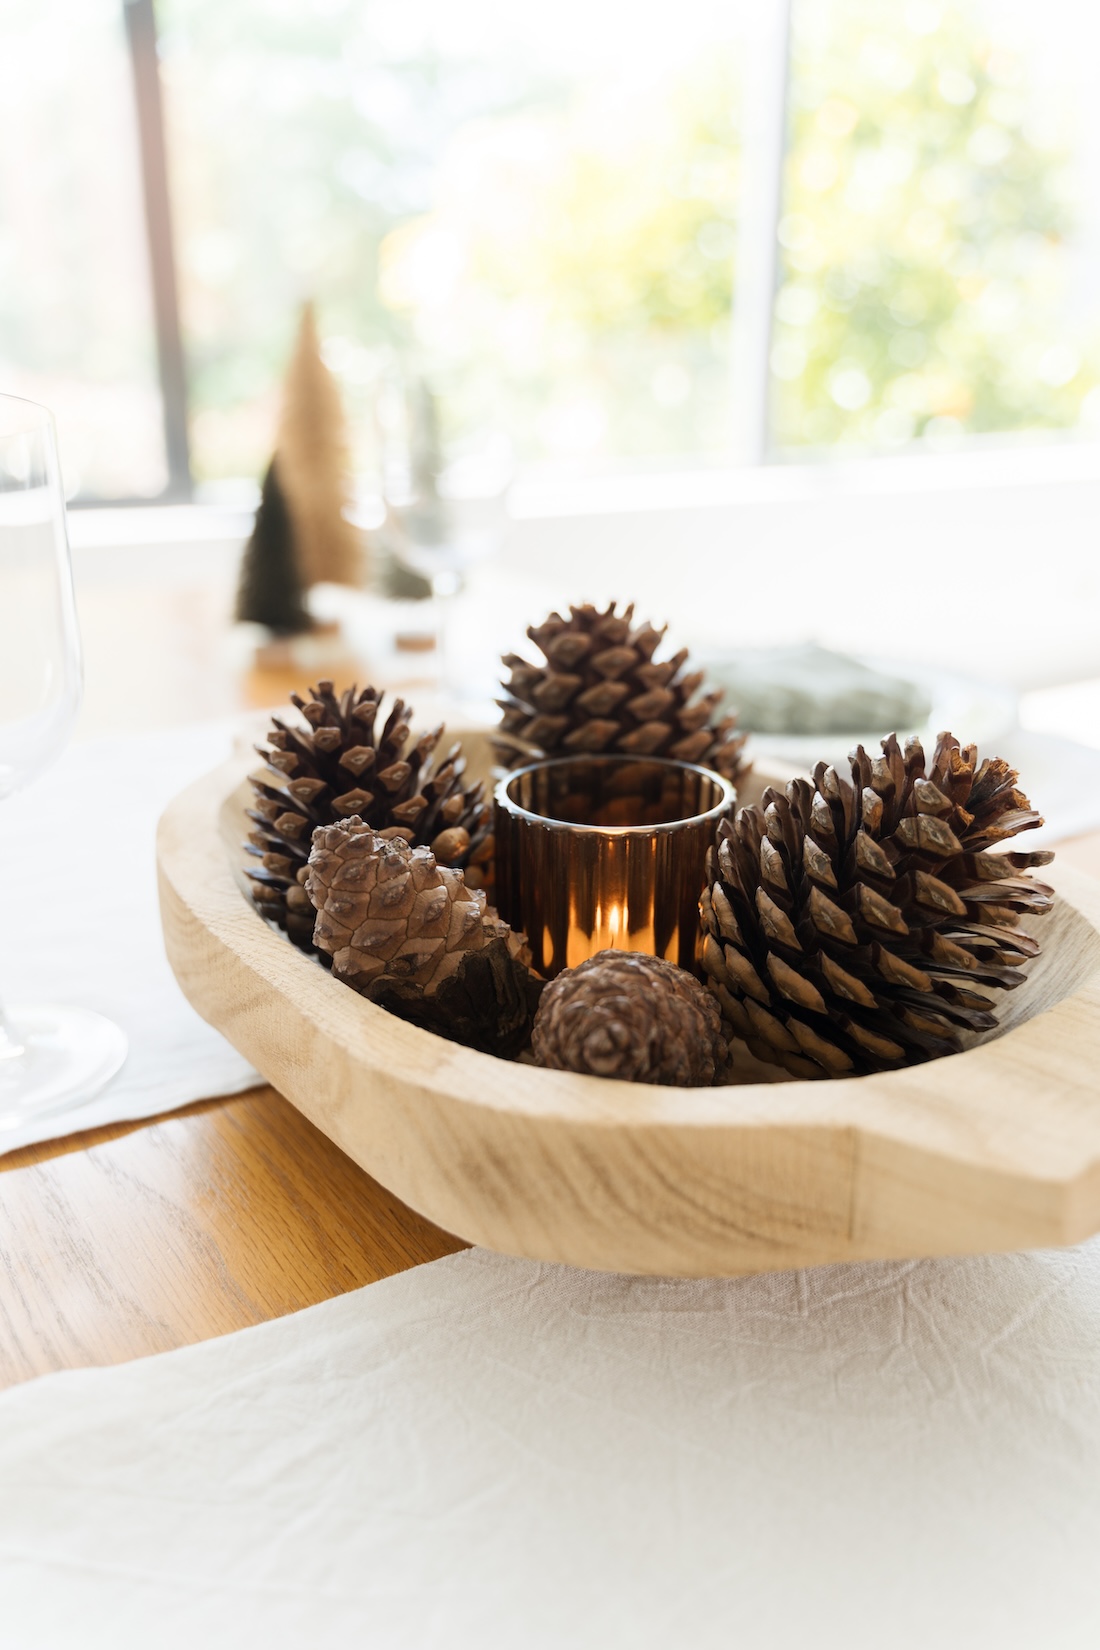 Finished Christmas scented pinecone centrepiece